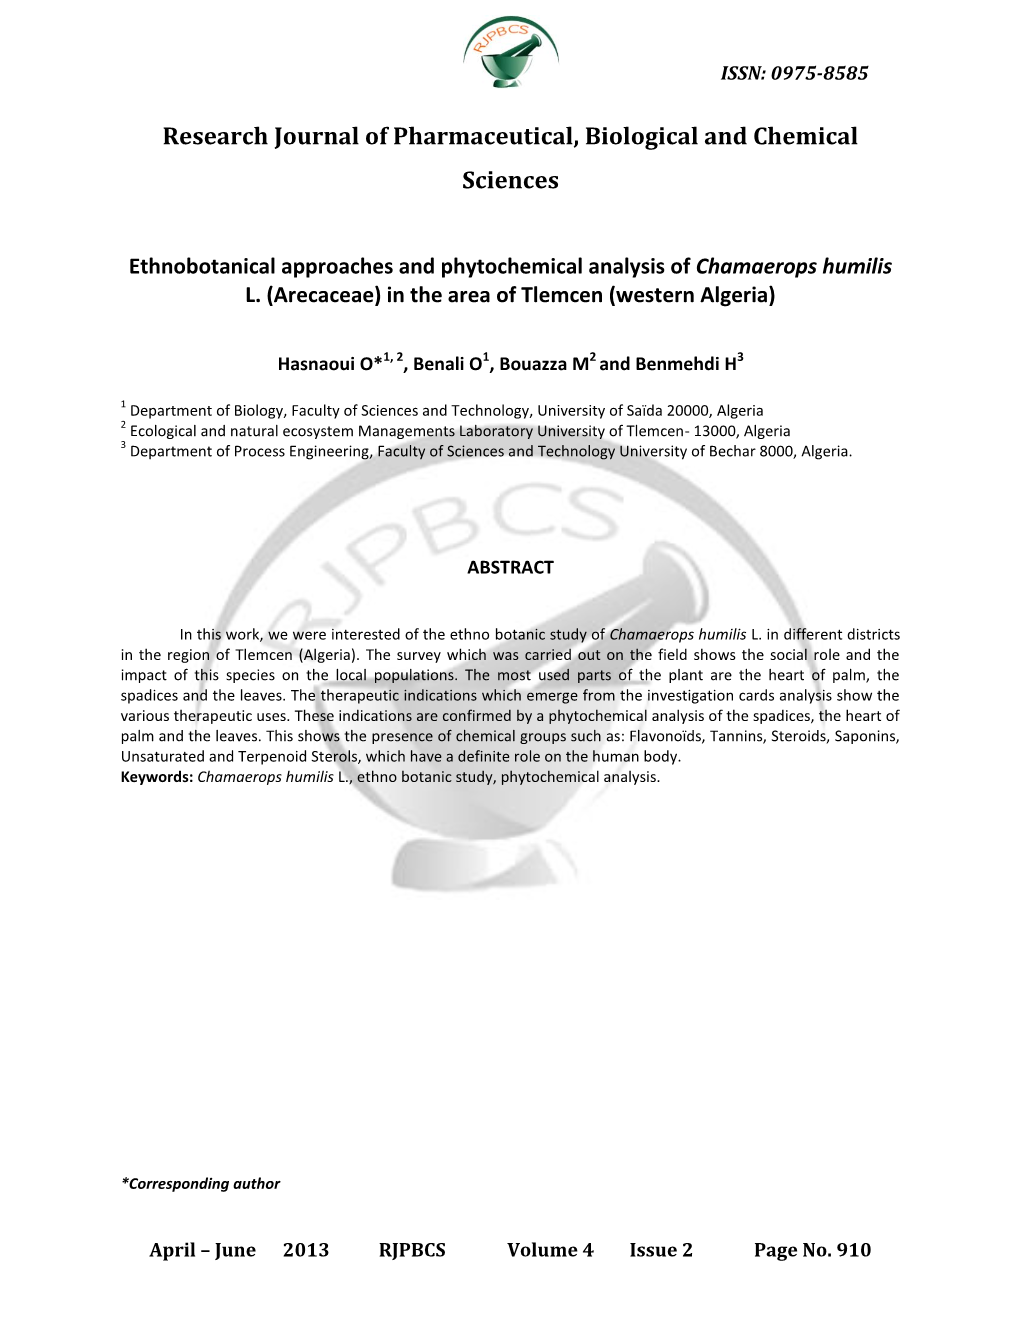 ISSN: 0975-8585 April – June 2013 RJPBCS Volume 4 Issue 2 Page